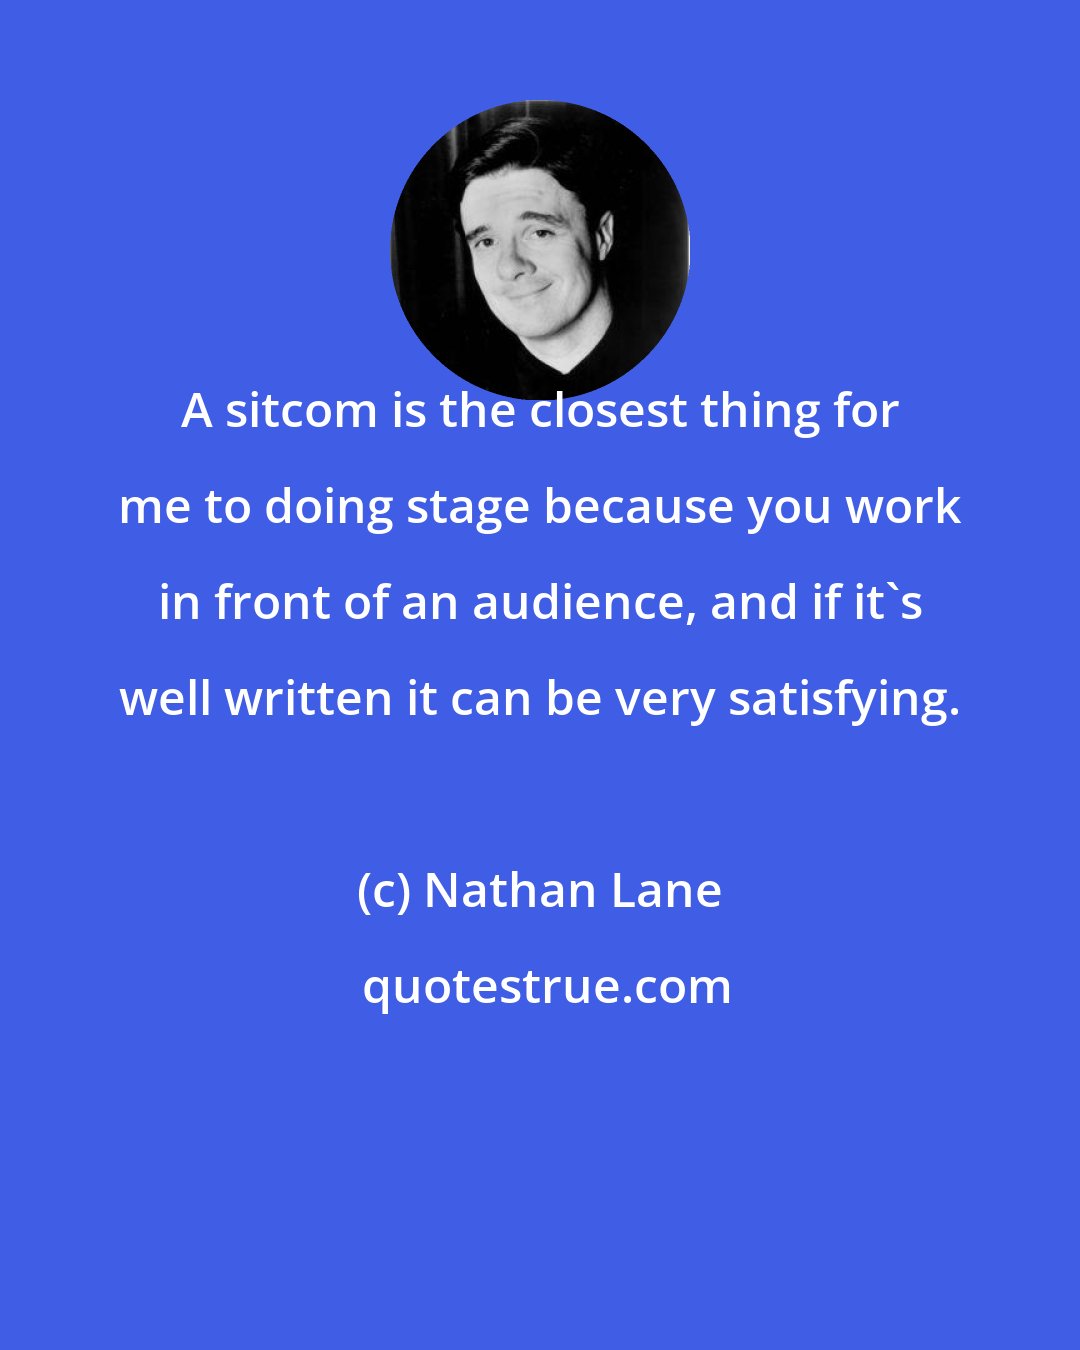 Nathan Lane: A sitcom is the closest thing for me to doing stage because you work in front of an audience, and if it's well written it can be very satisfying.